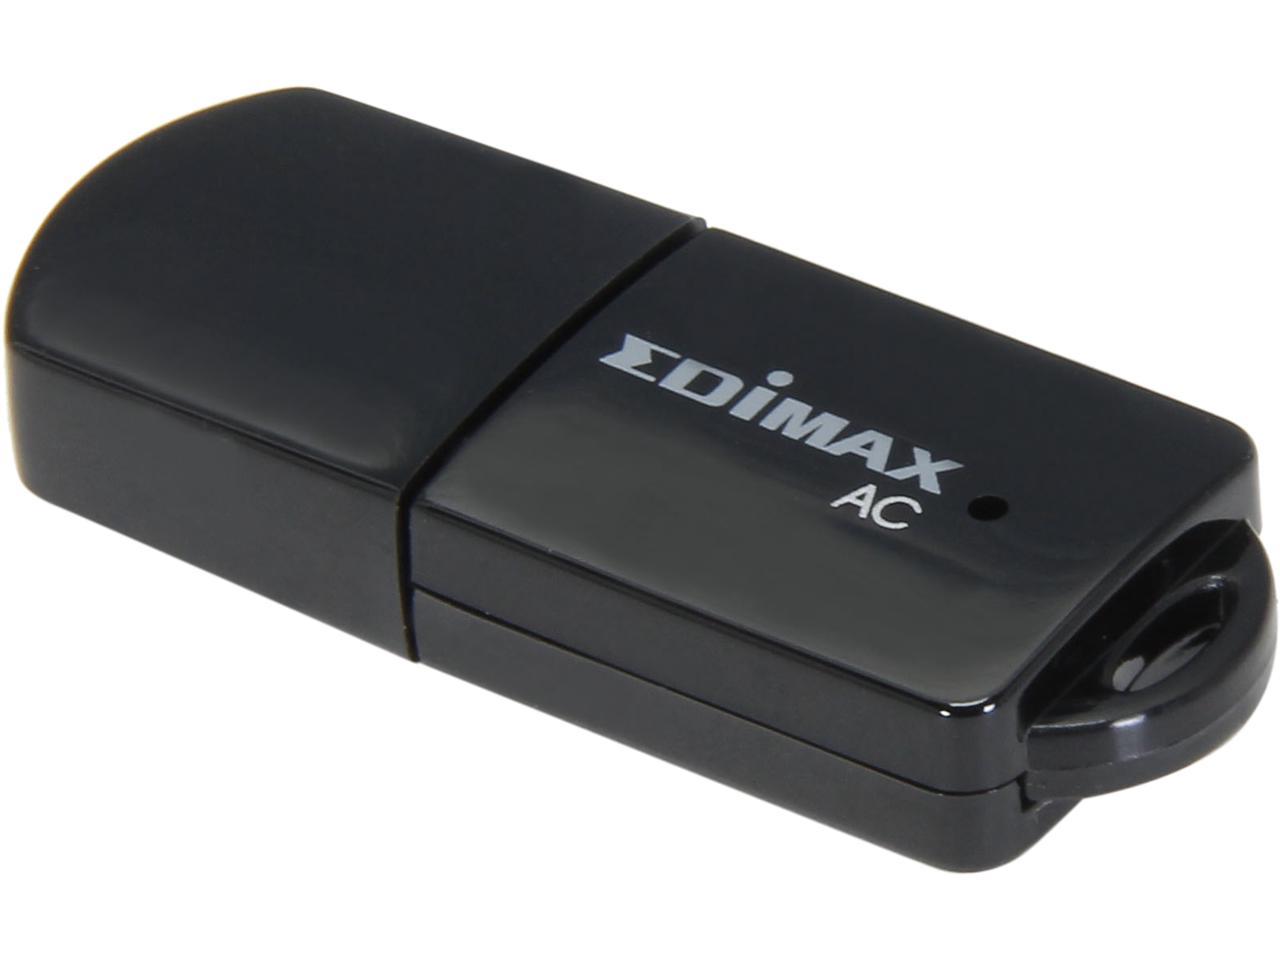 the edimax ac600 wireless driver is problems